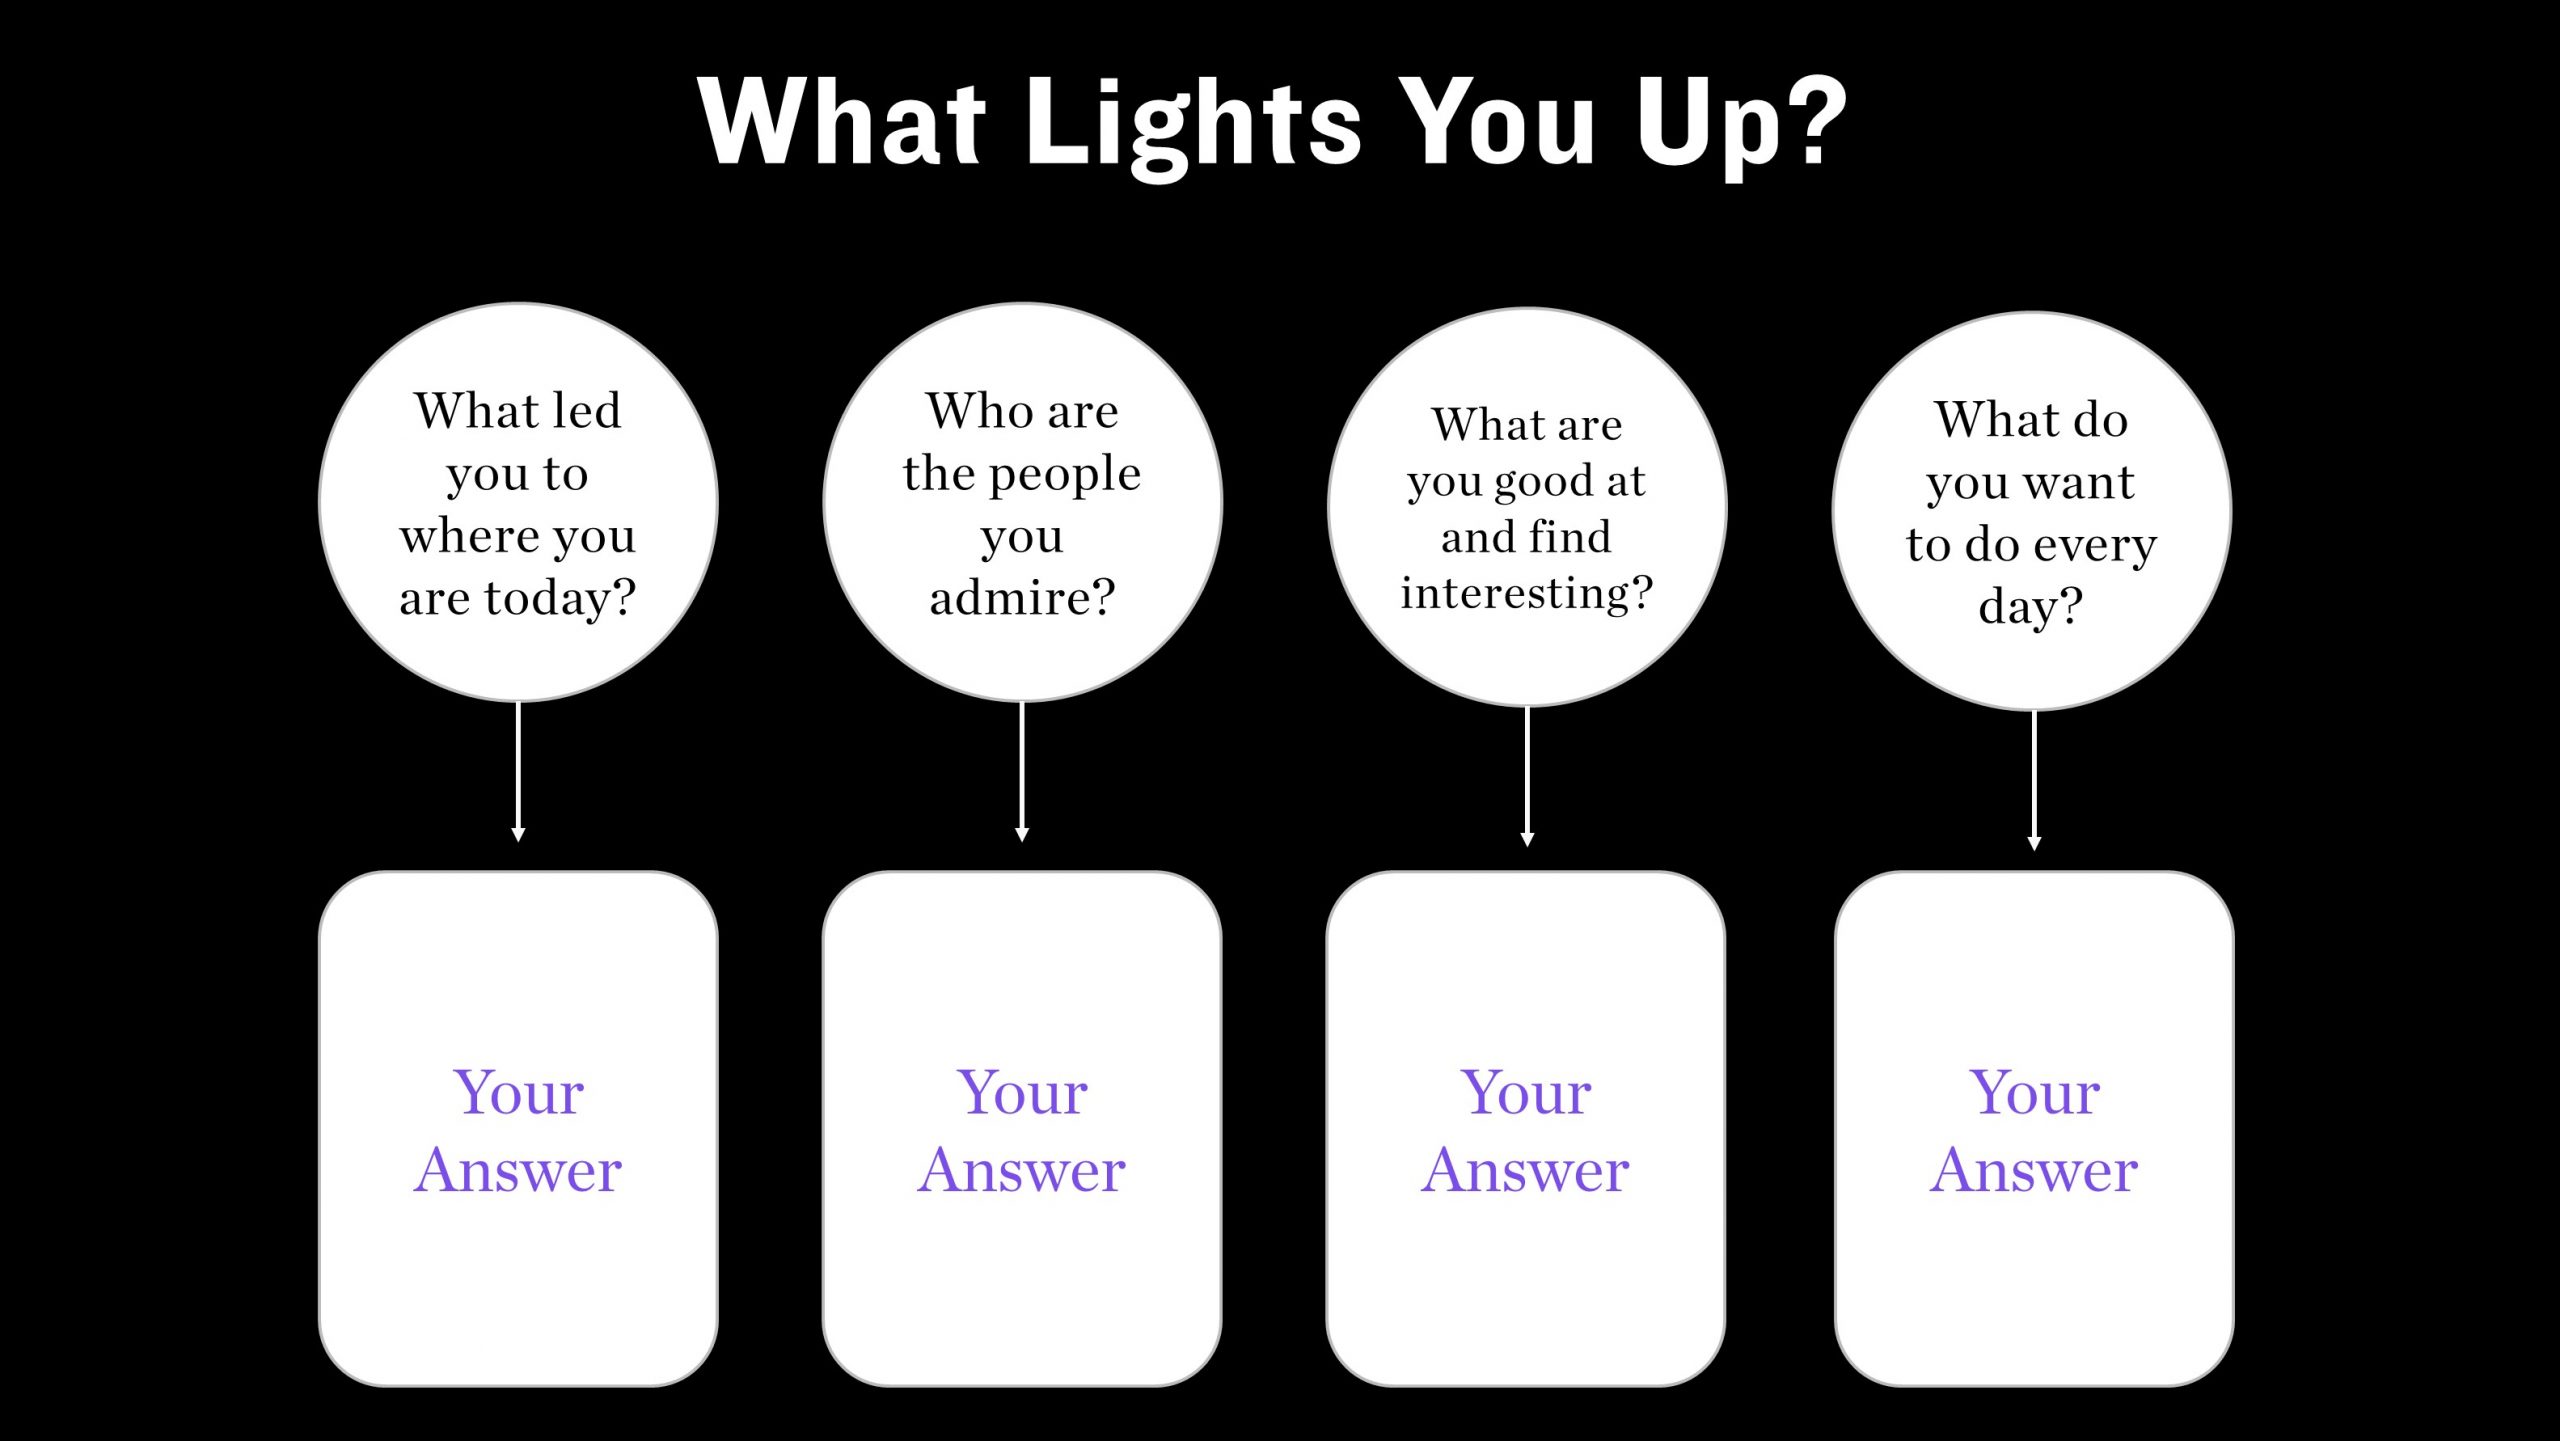 What lights you up - questions